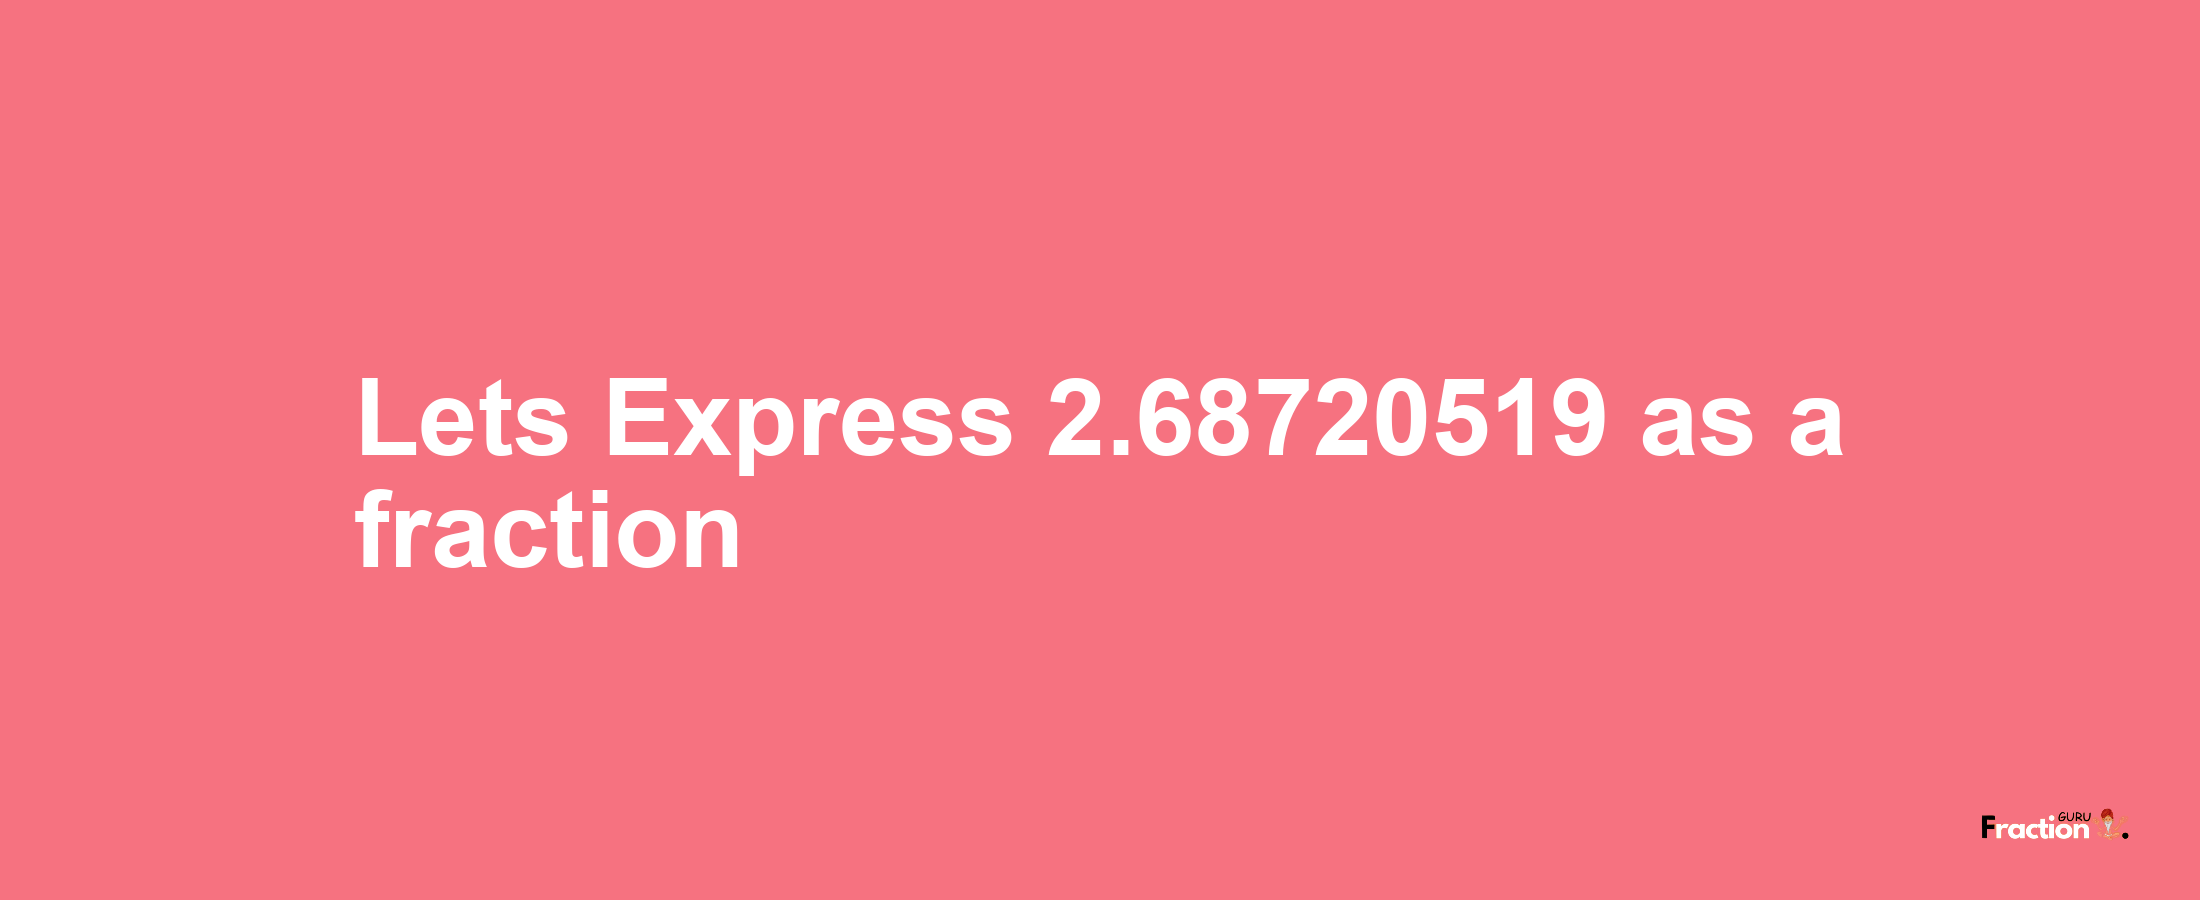 Lets Express 2.68720519 as afraction